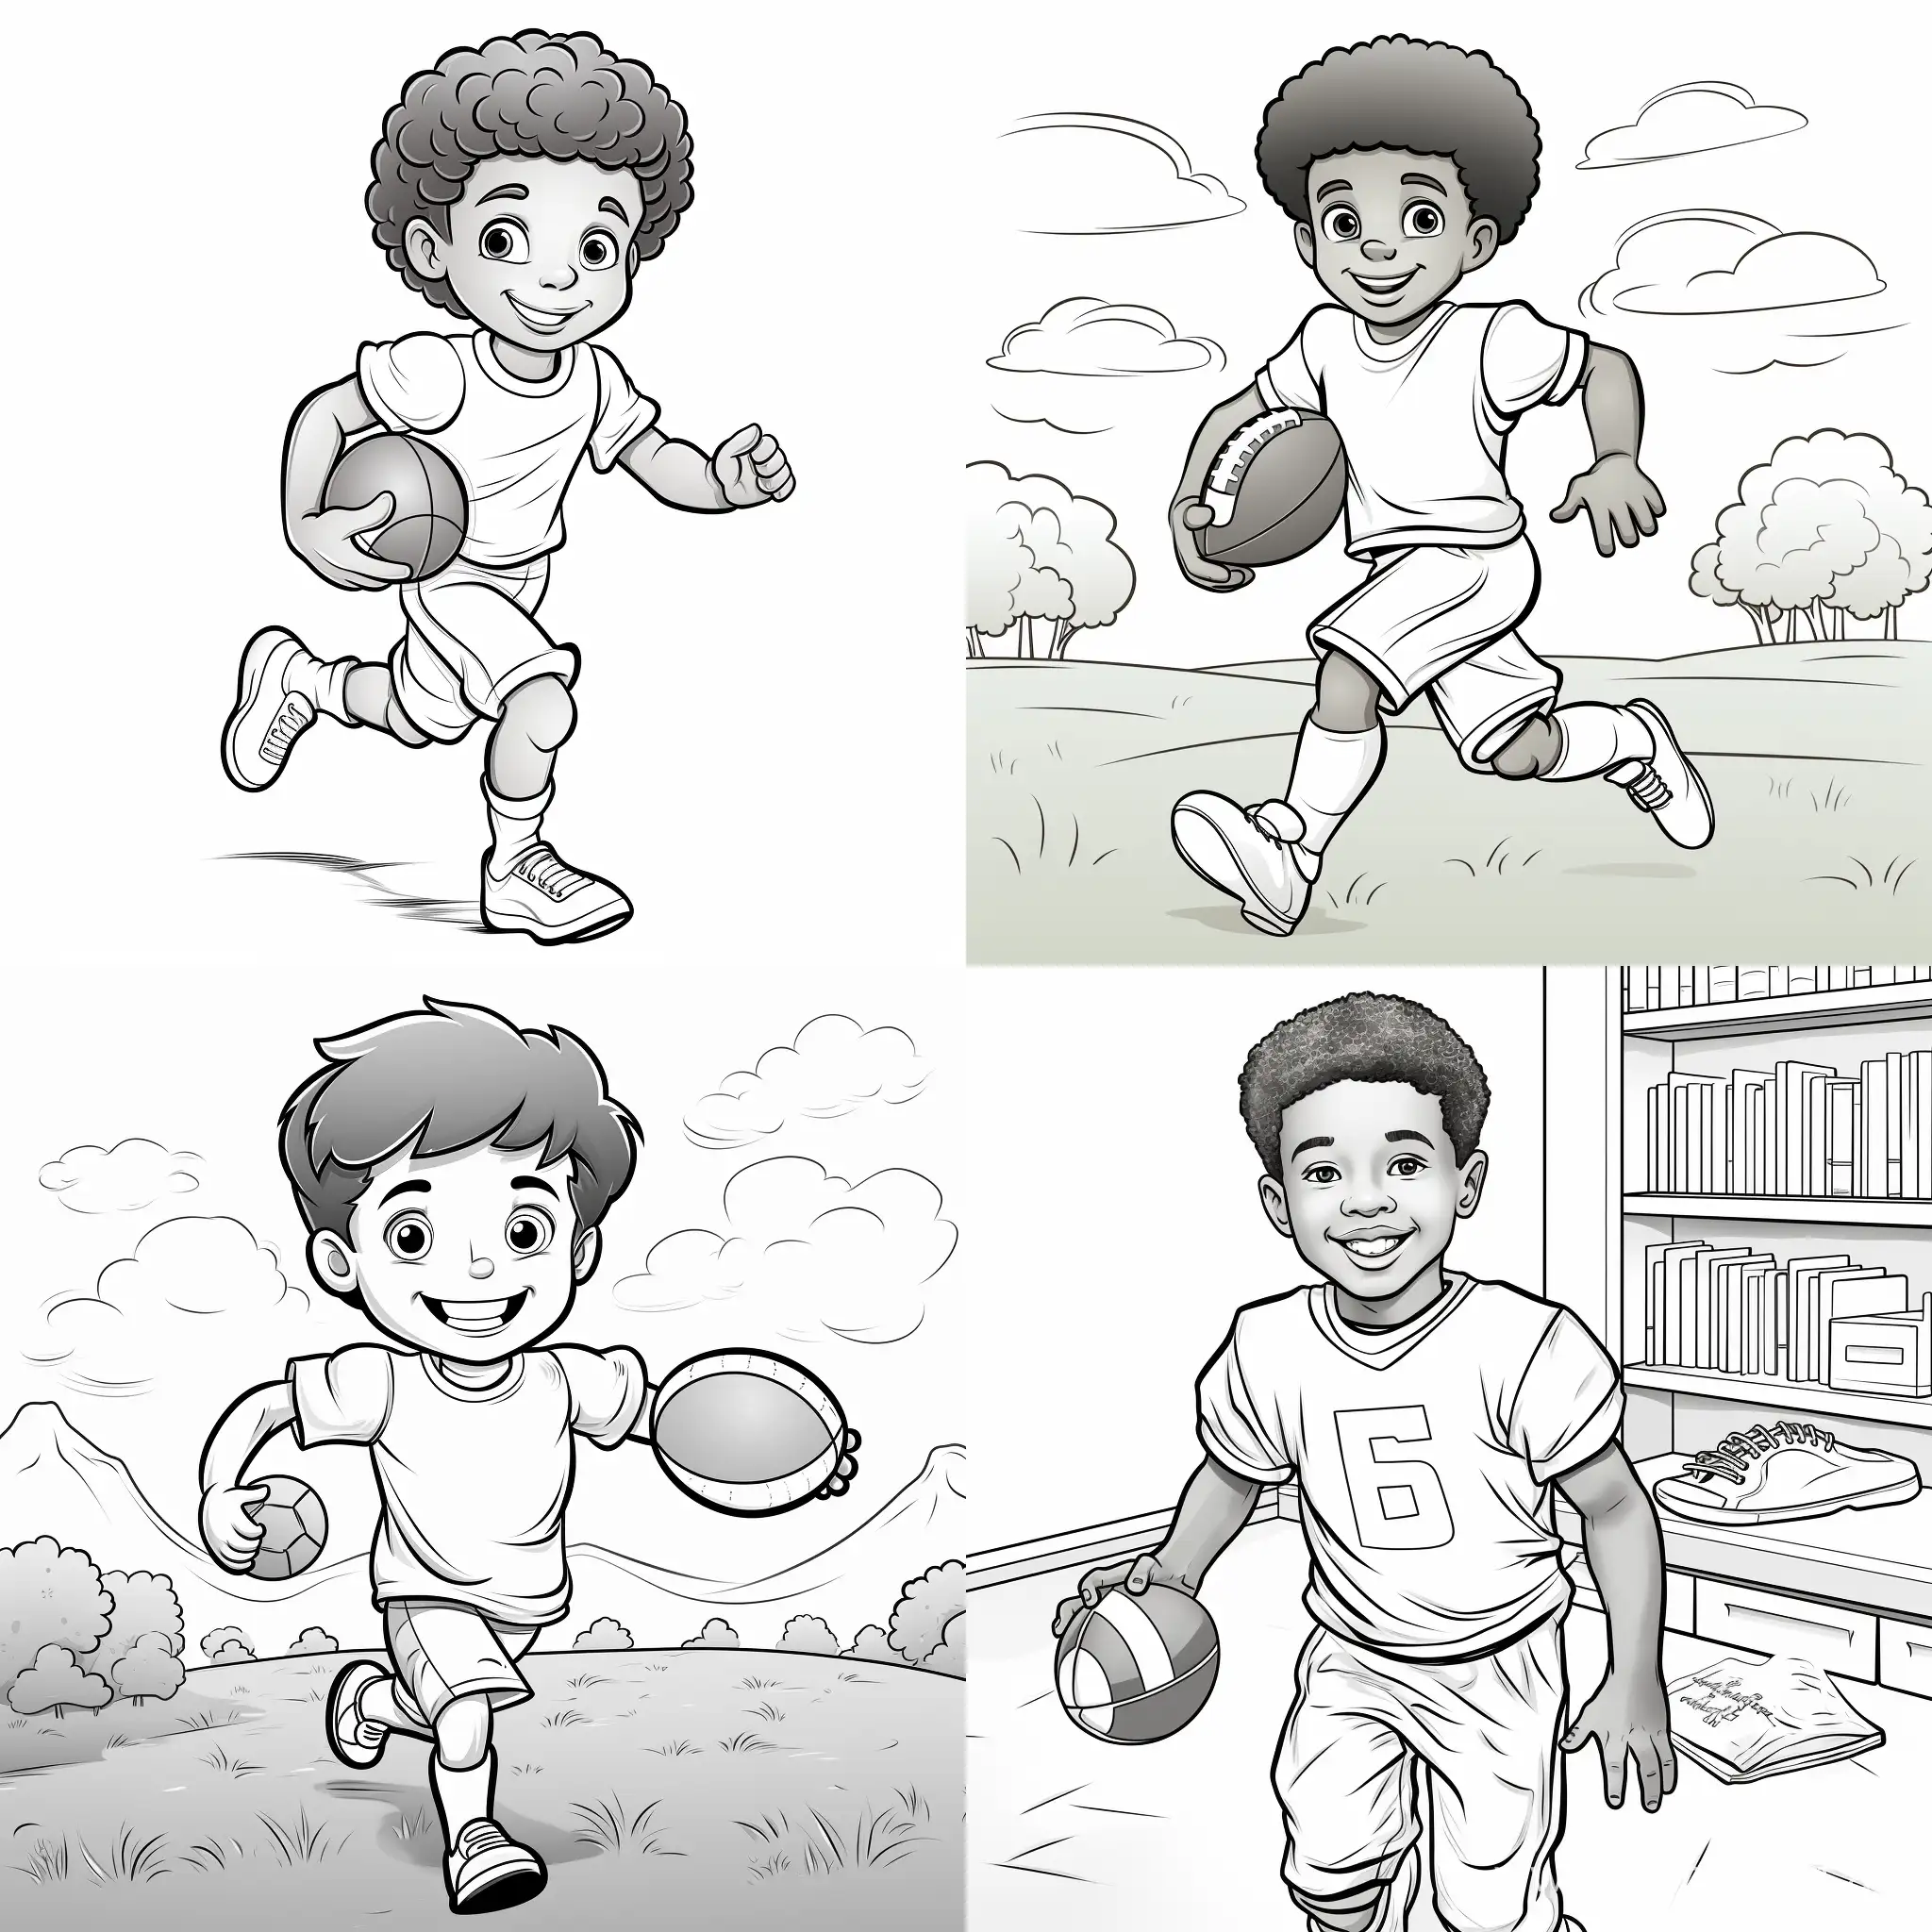 Adorable-Black-Boy-Playing-Football-Coloring-Cartoon-for-Kids-Ages-58